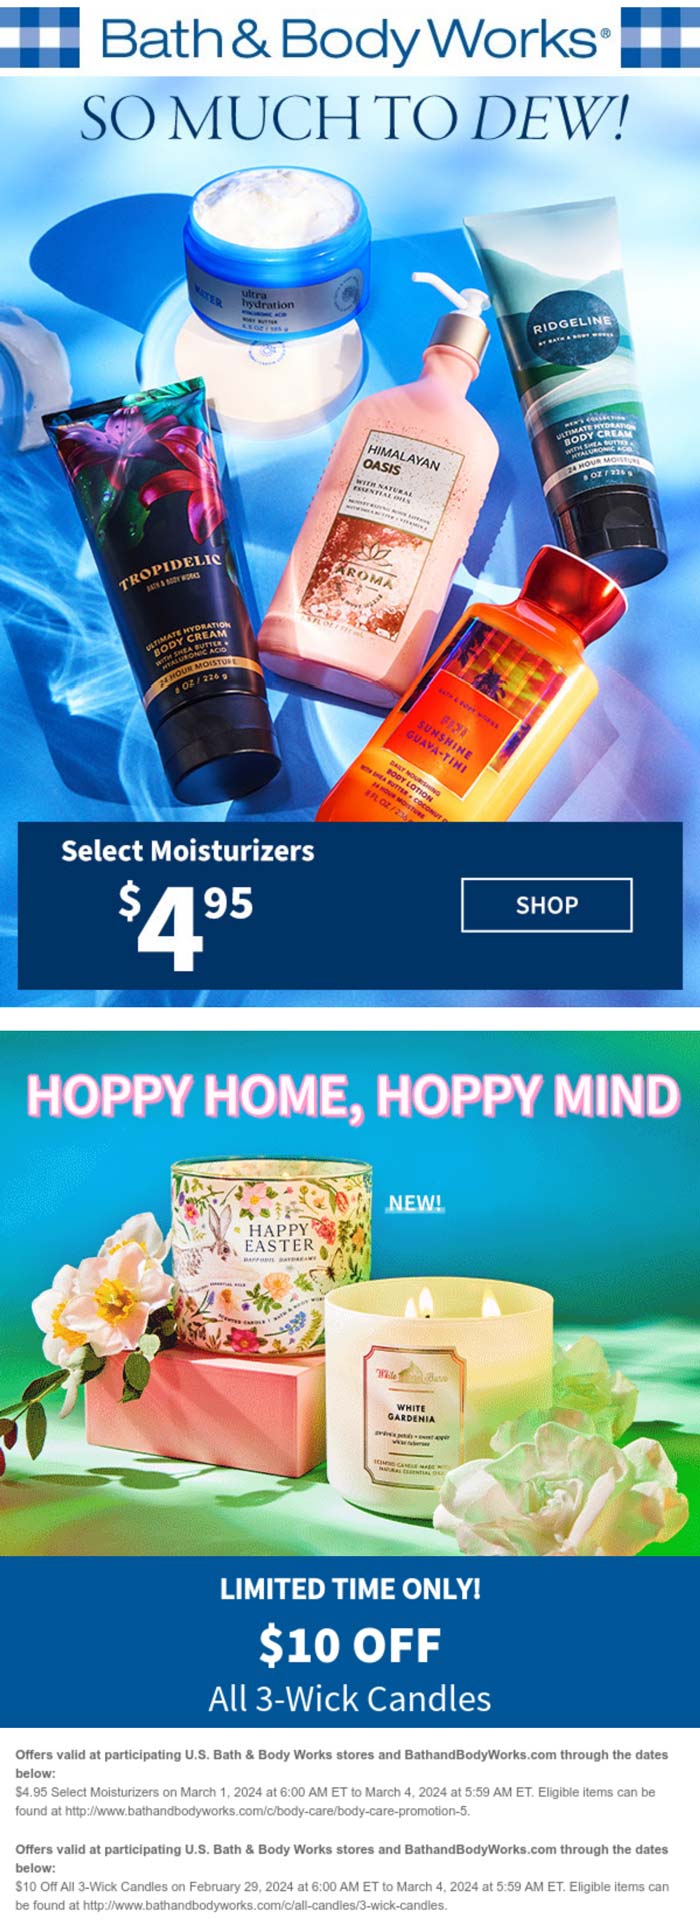 Bath & Body Works stores Coupon  $5 moisturizers & $10 off 3-wick candles at Bath & Body Works #bathbodyworks 